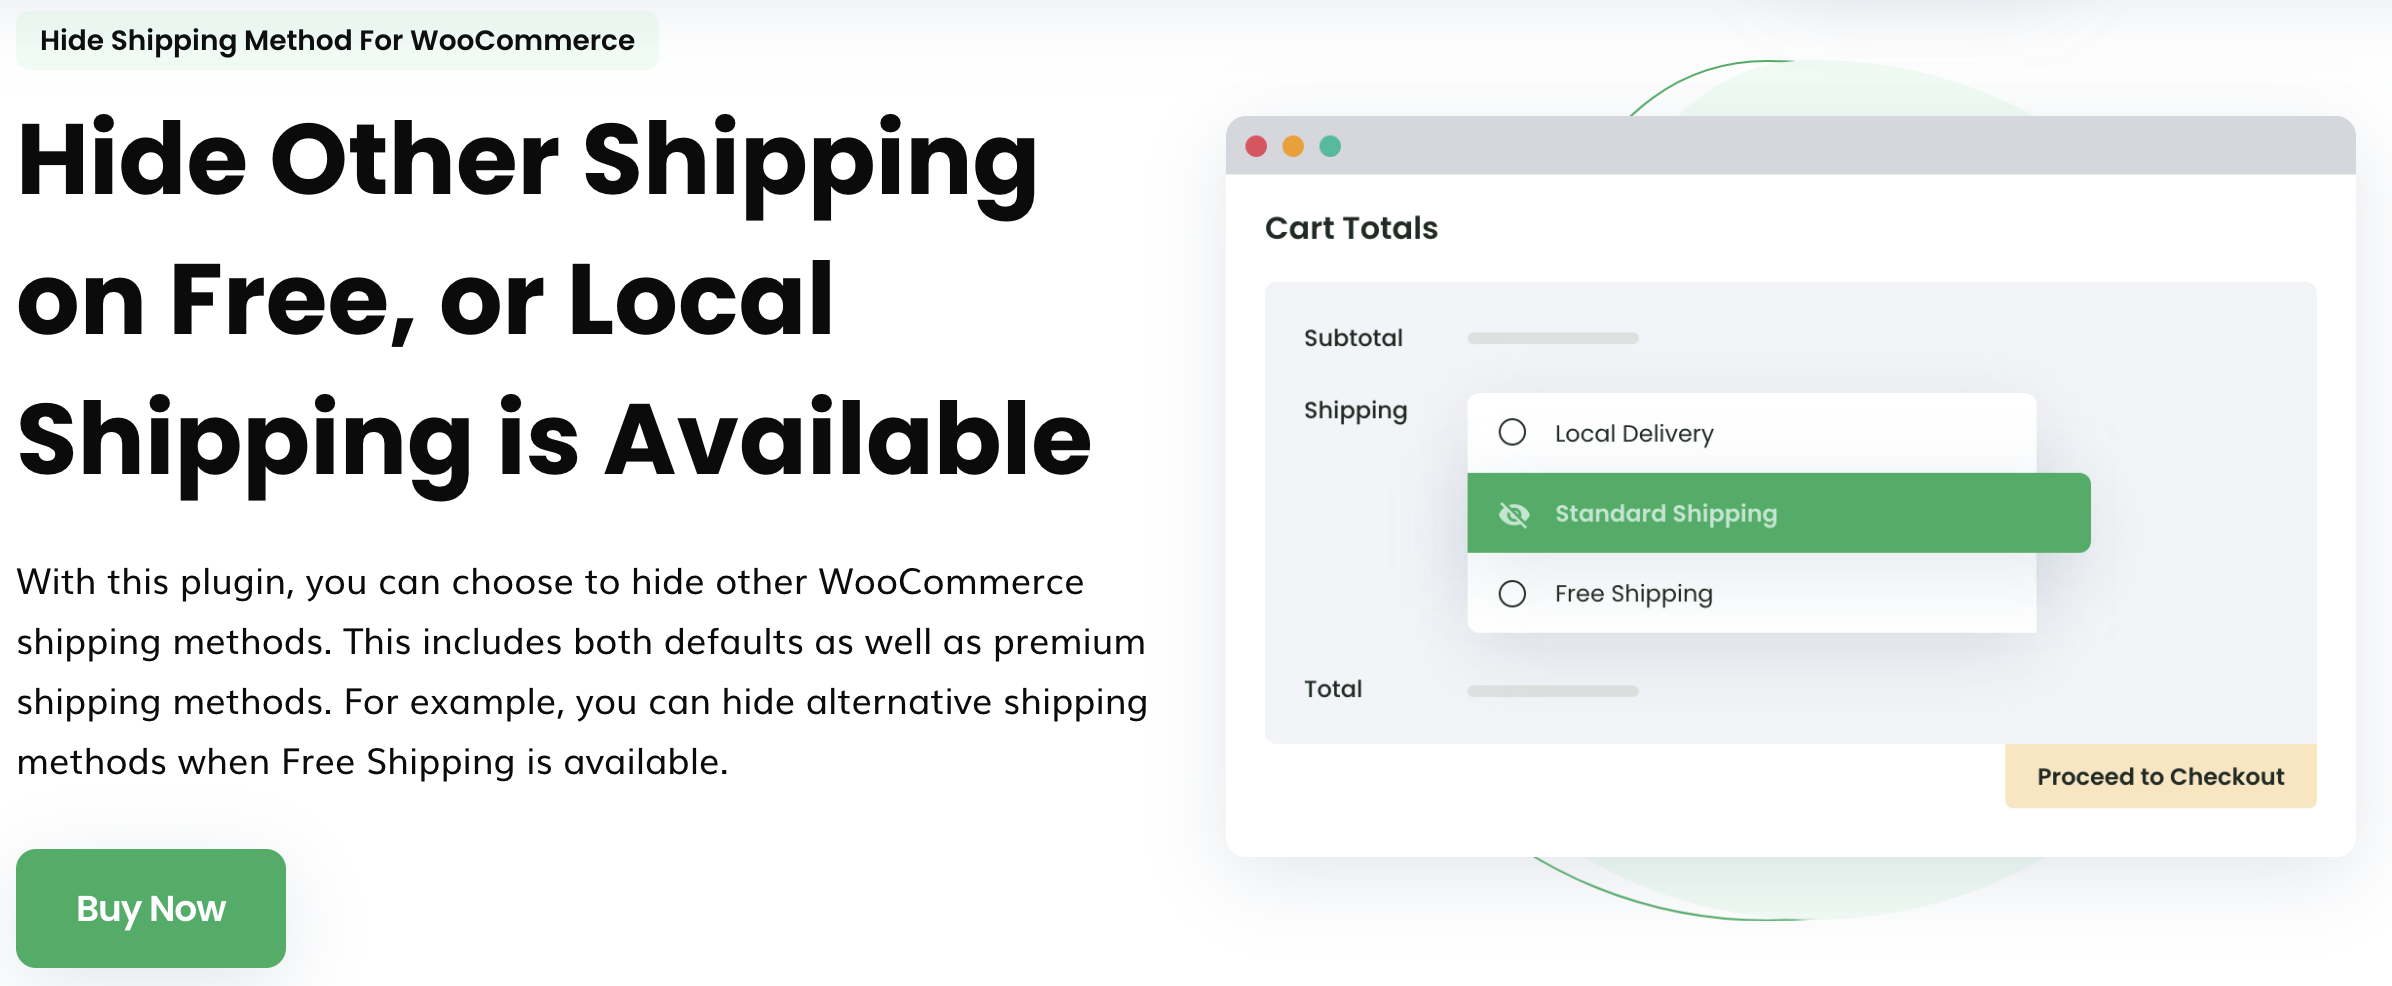 Hide Shipping Method For WooCommerce